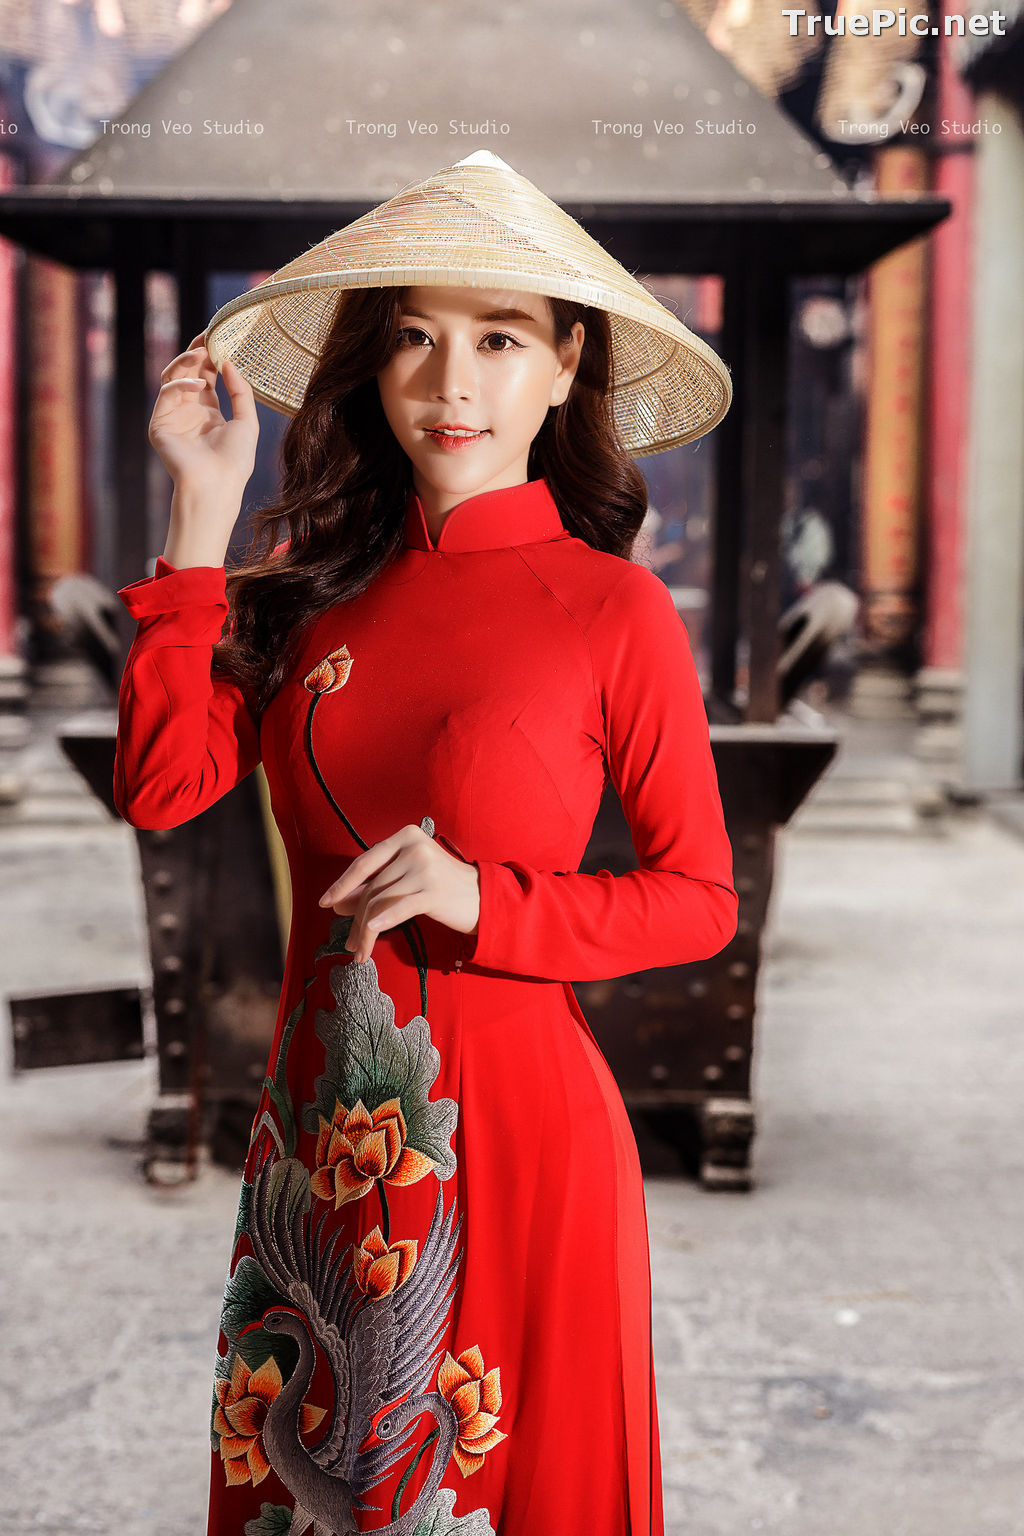 Image The Beauty of Vietnamese Girls with Traditional Dress (Ao Dai) #4 - TruePic.net - Picture-22